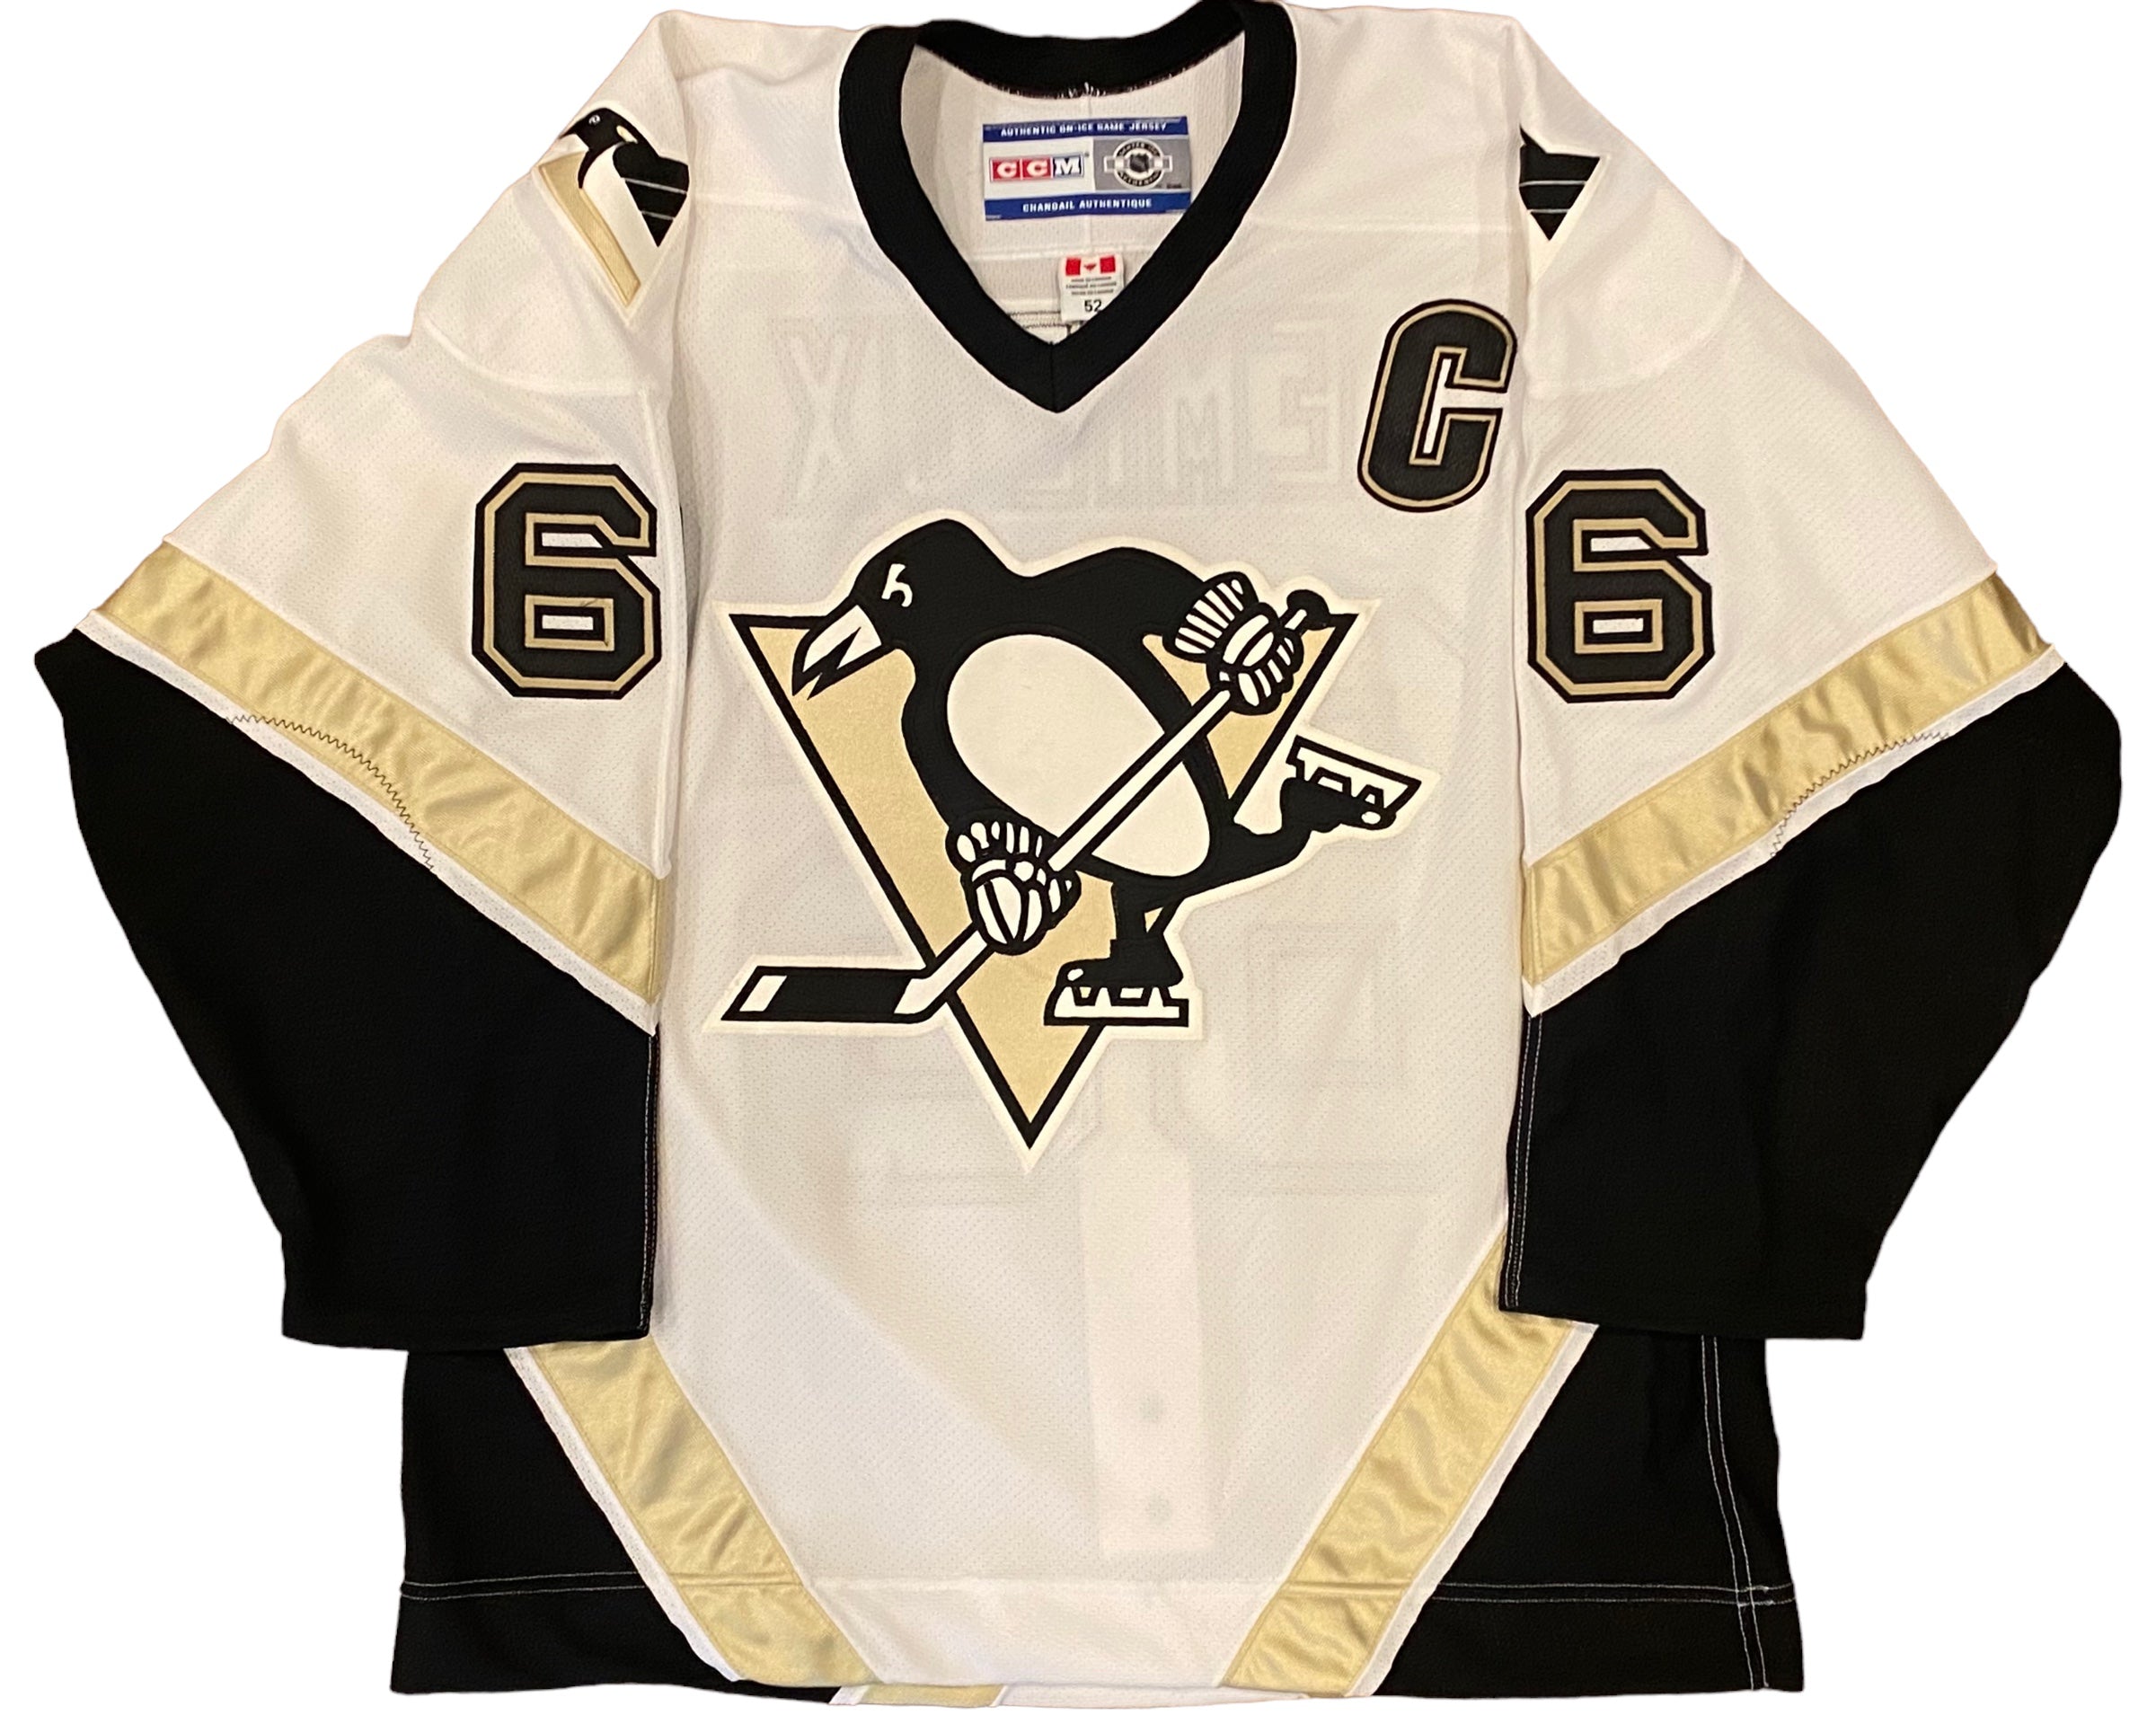 Mario Lemieux Signed Pittsburgh Penguins CCM Maska Cosby Jersey - Vinyl  Name/Numbers